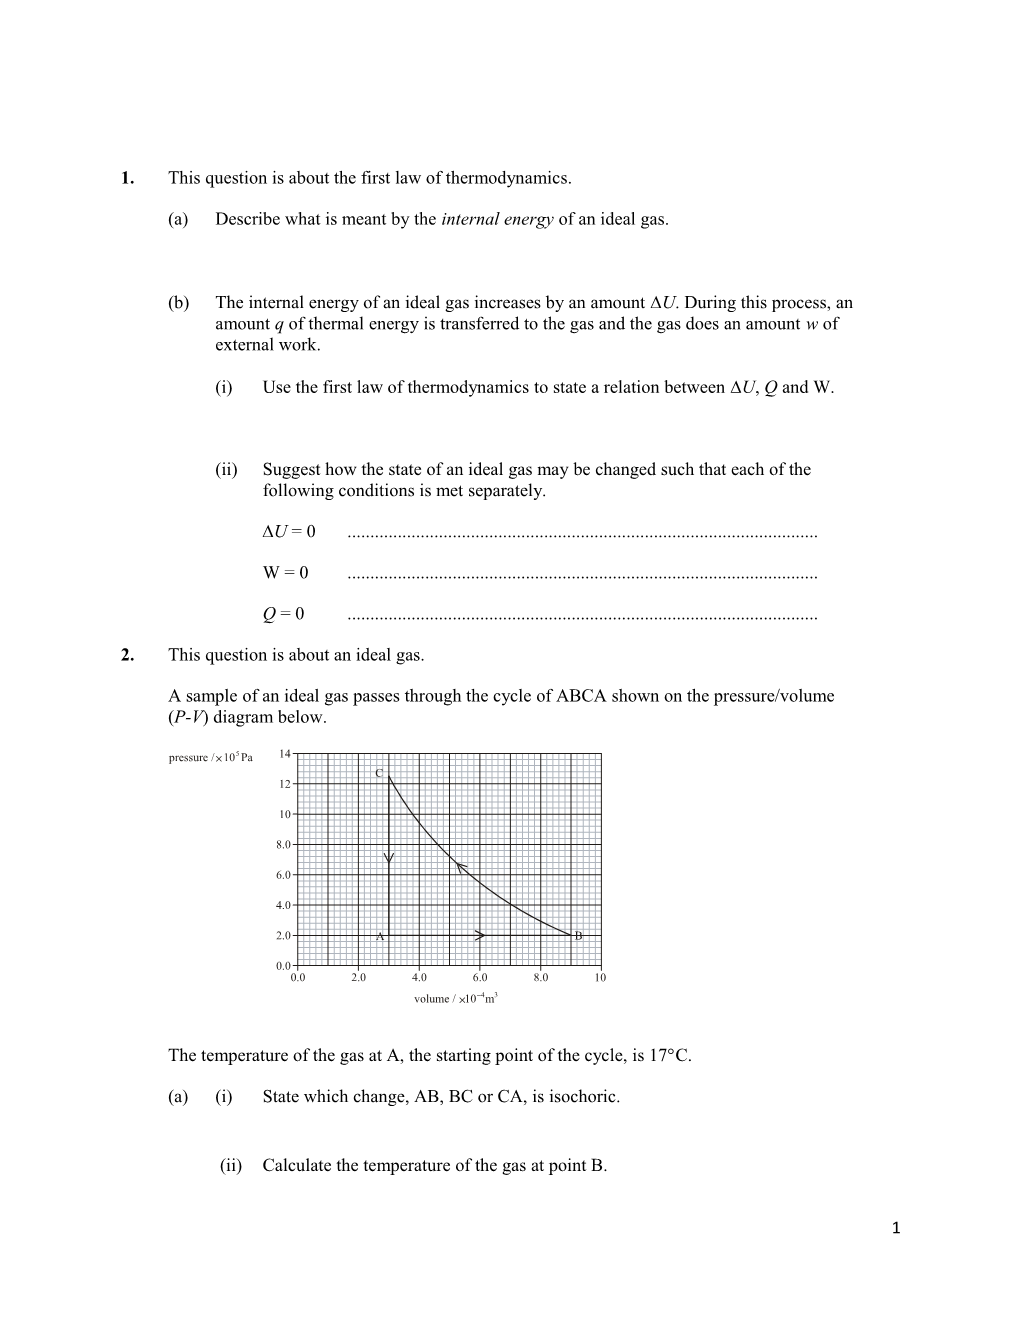 1. This Question Is About the First Law of Thermodynamics